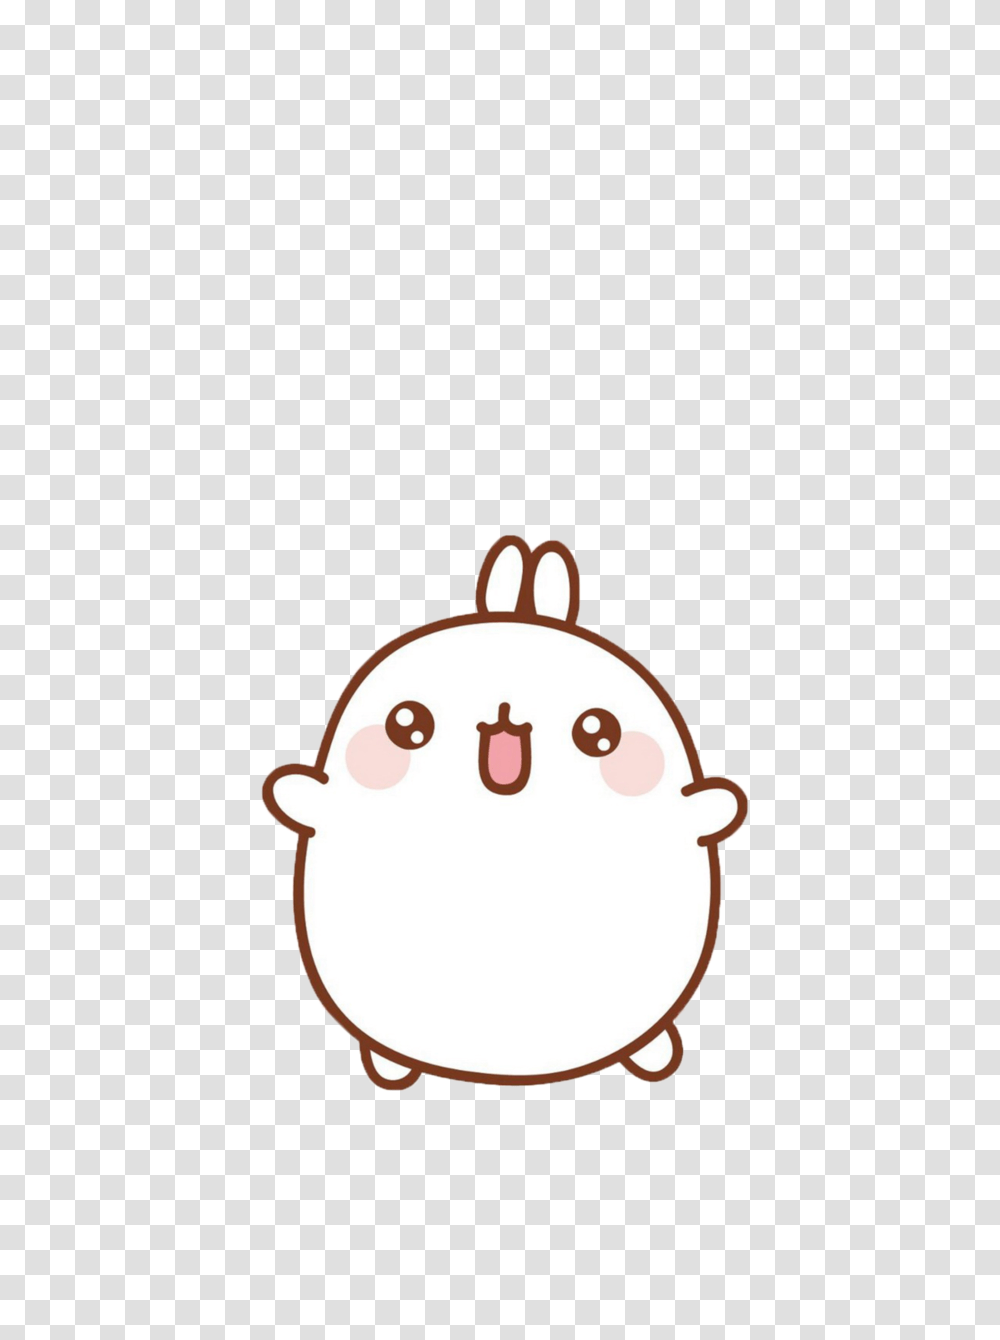 Images About Molang On We Heart It See More, Birthday Cake, Dessert, Food, Bag Transparent Png